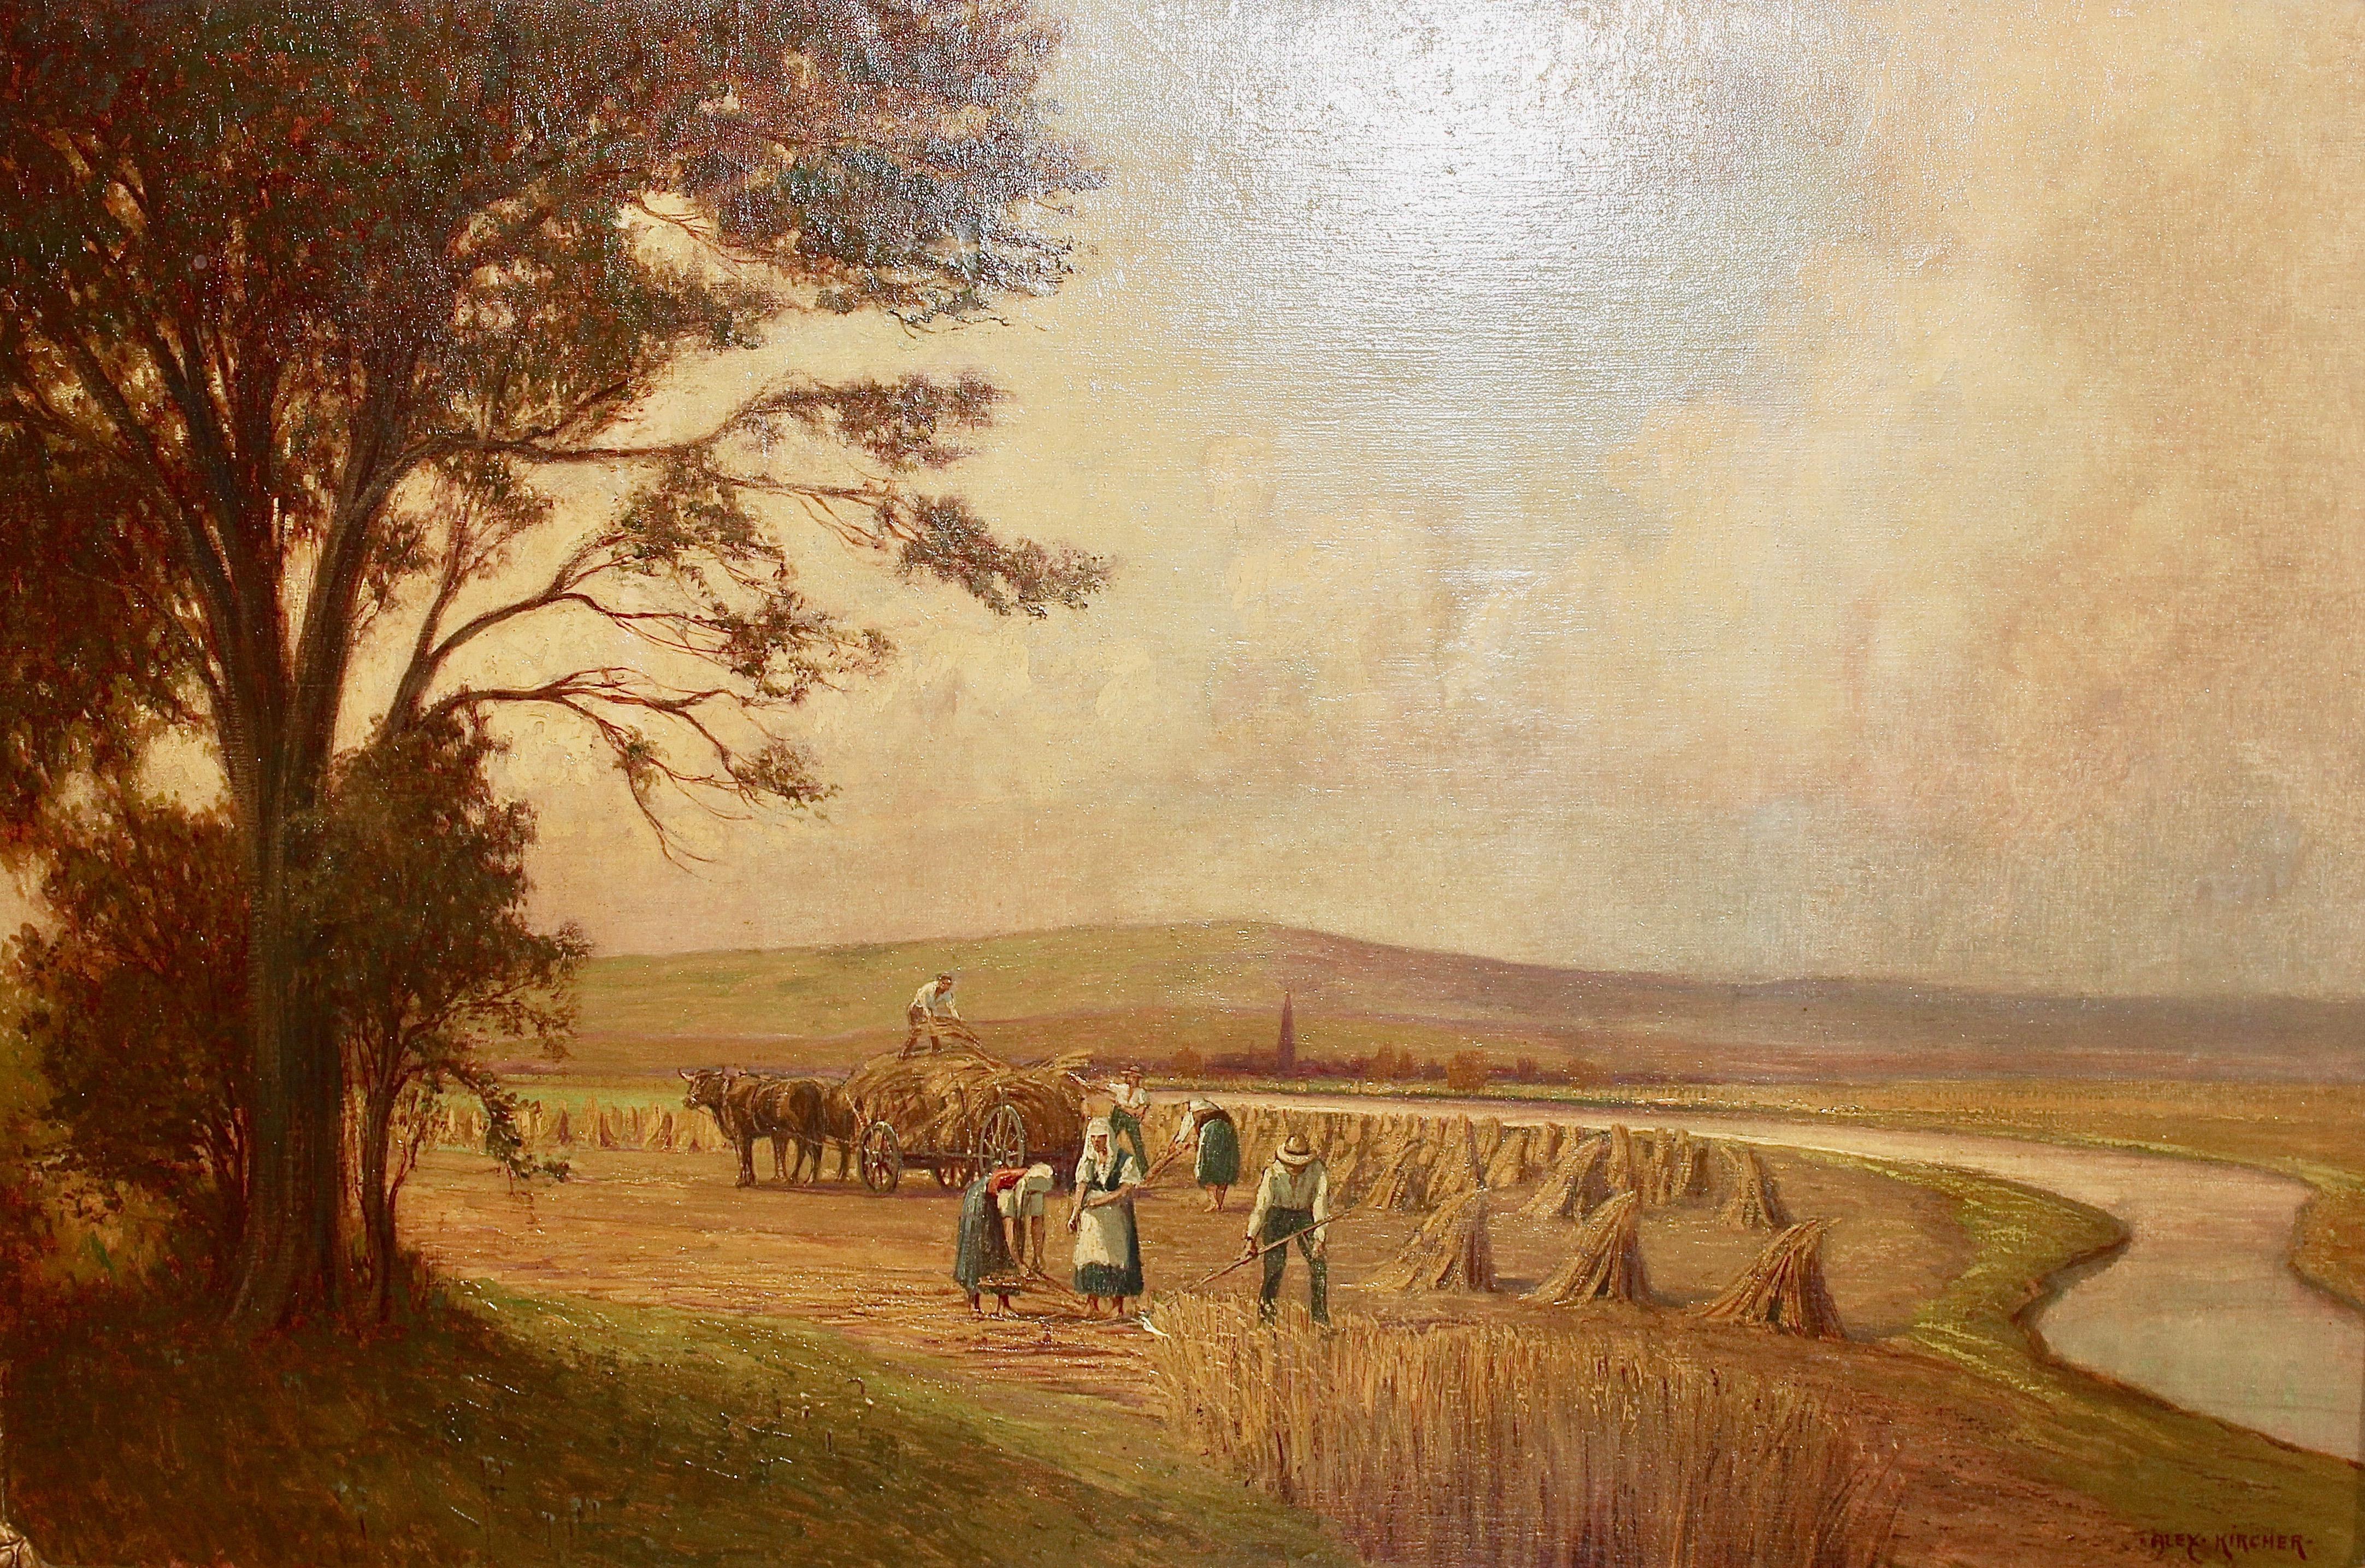 Antique painting, 19th century, oil on canvas, harvest by the river. - Painting by ALEXANDRE KIRCHER